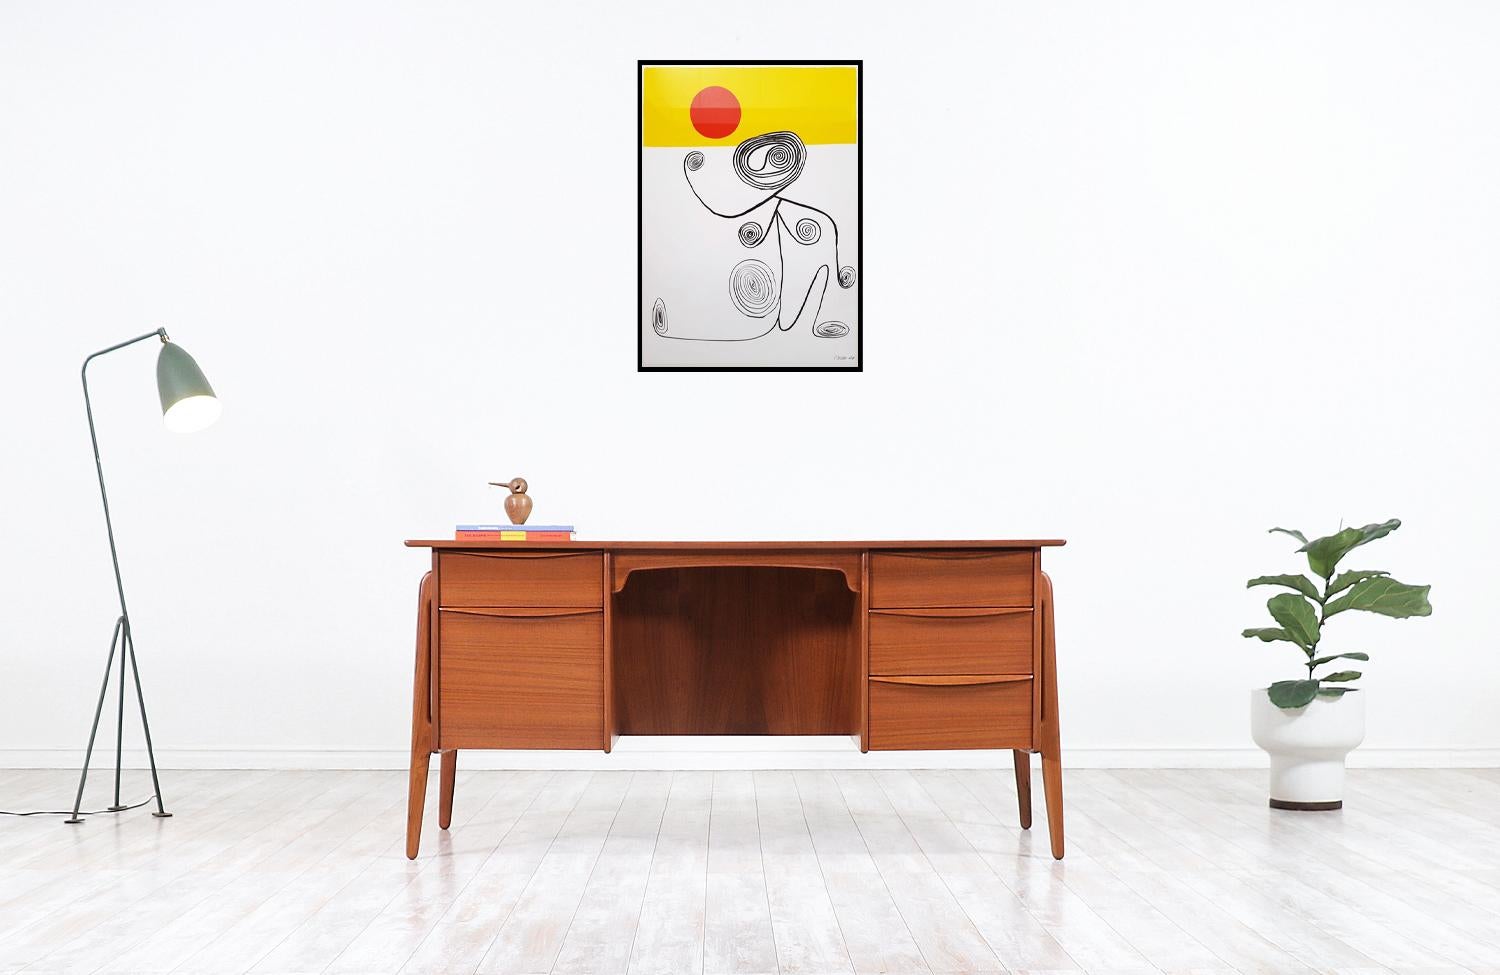 One of our most versatile Danish modern executive desk designed by architect Svend A. Madsen in collaboration with Sigurd Hansen in Denmark circa 1950s. This classic and elegant Danish desk features a solid teak frame with a stunning warm grain